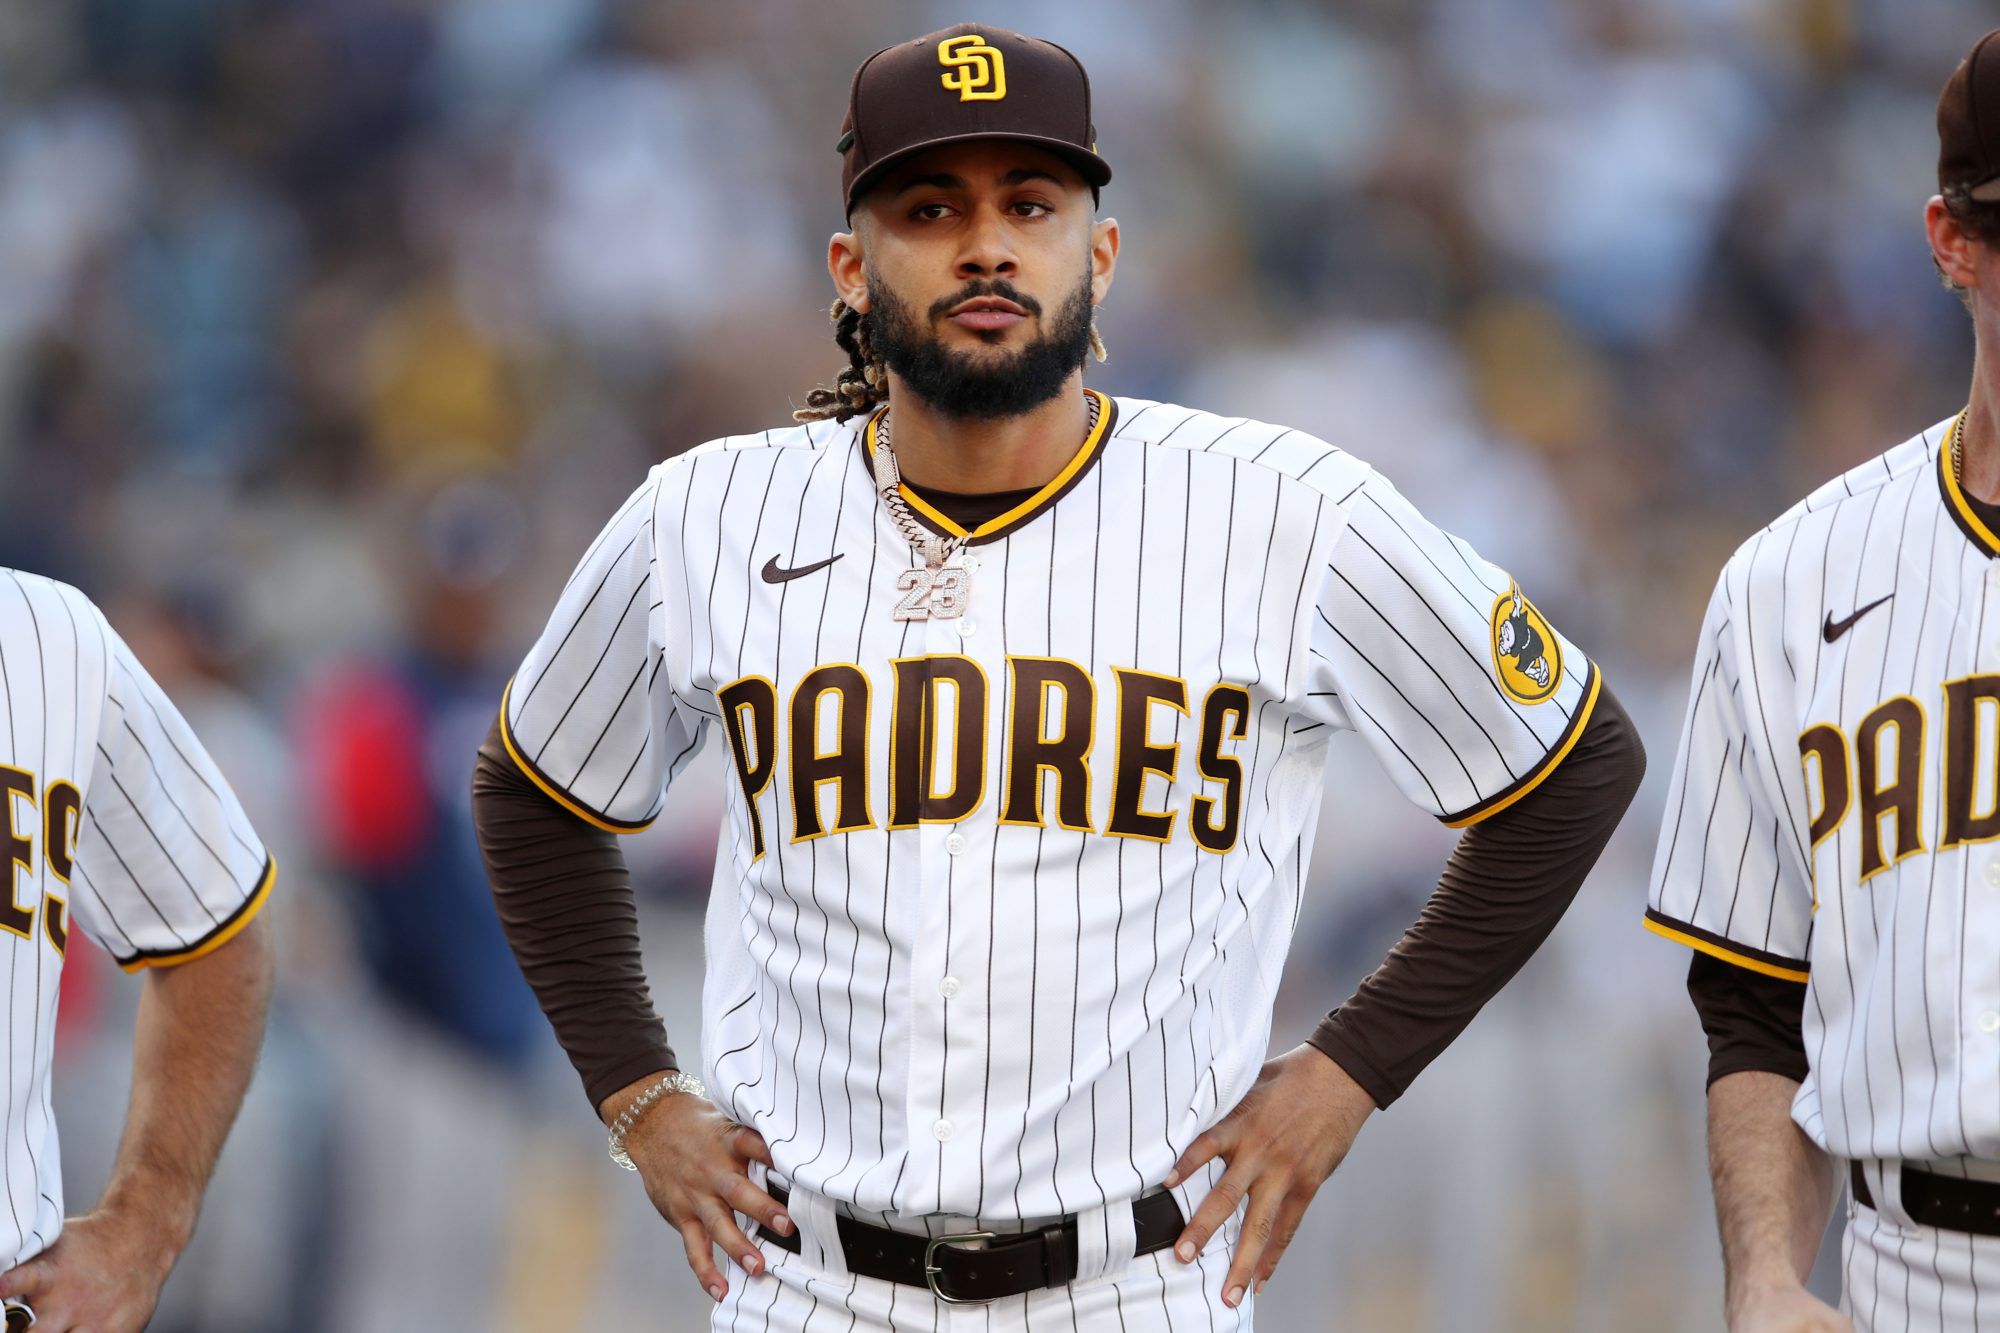 Fallout from Tatis Jr. suspension has teammates disappointed and fans angry